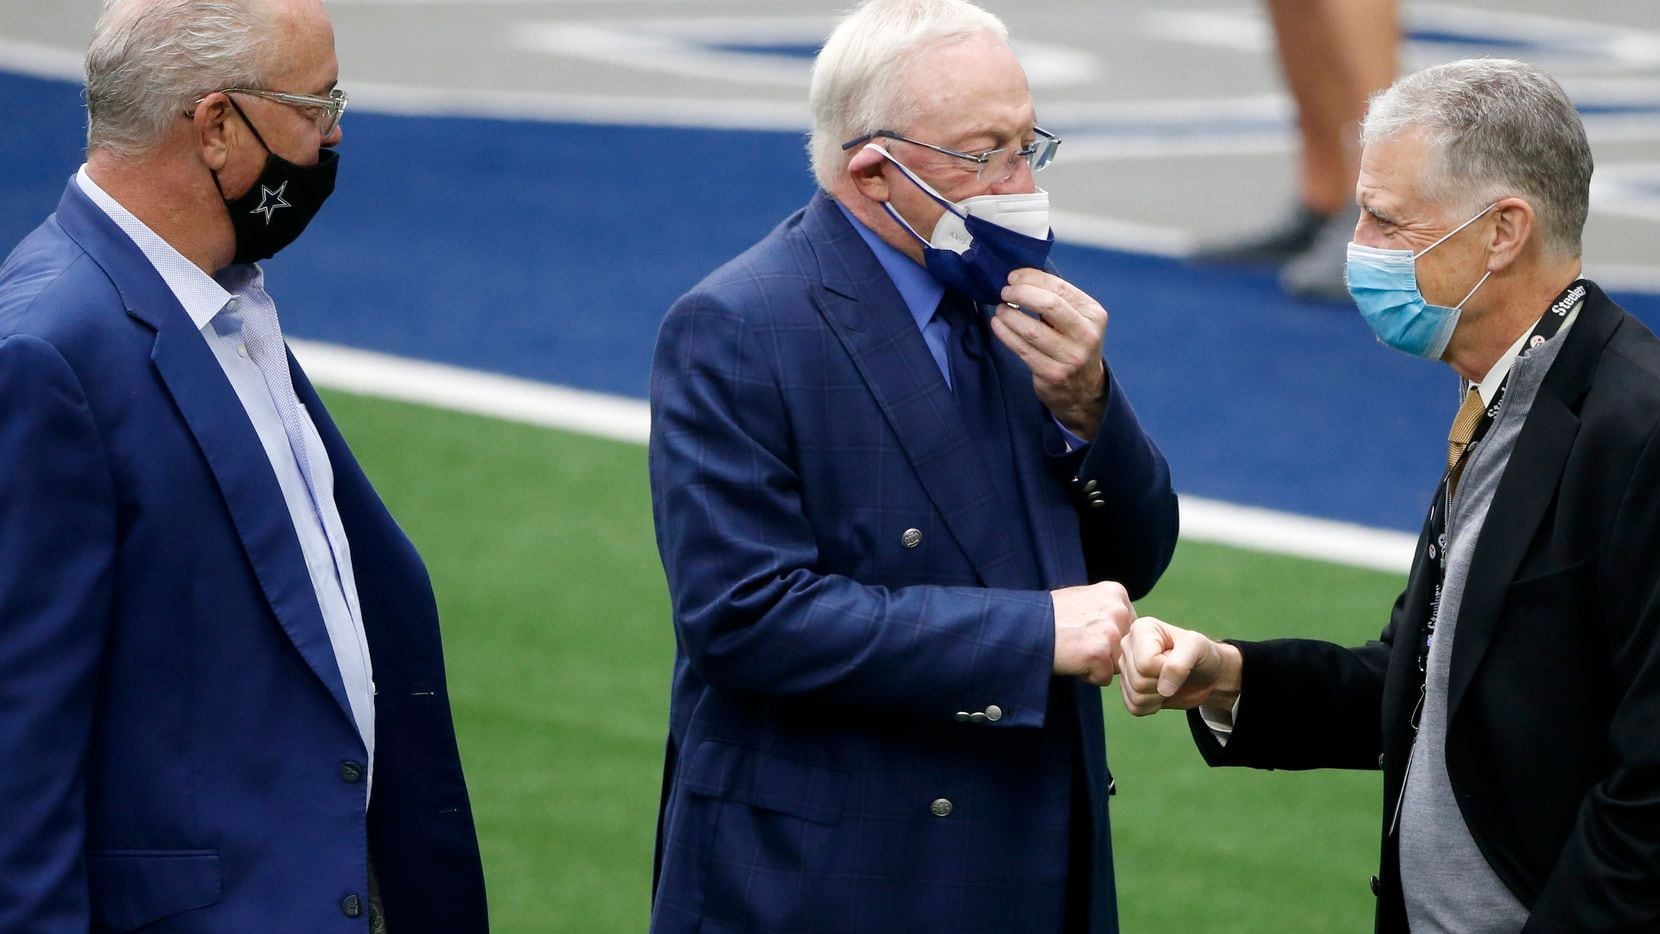 Cowboys executive vice president Stephen Jones (left) and owner Jerry Jones (center) greet Steelers owner Art Rooney II during team warmups before a game in Arlington on Sunday, Nov. 8, 2020. (AP Photo/Michael Ainsworth)